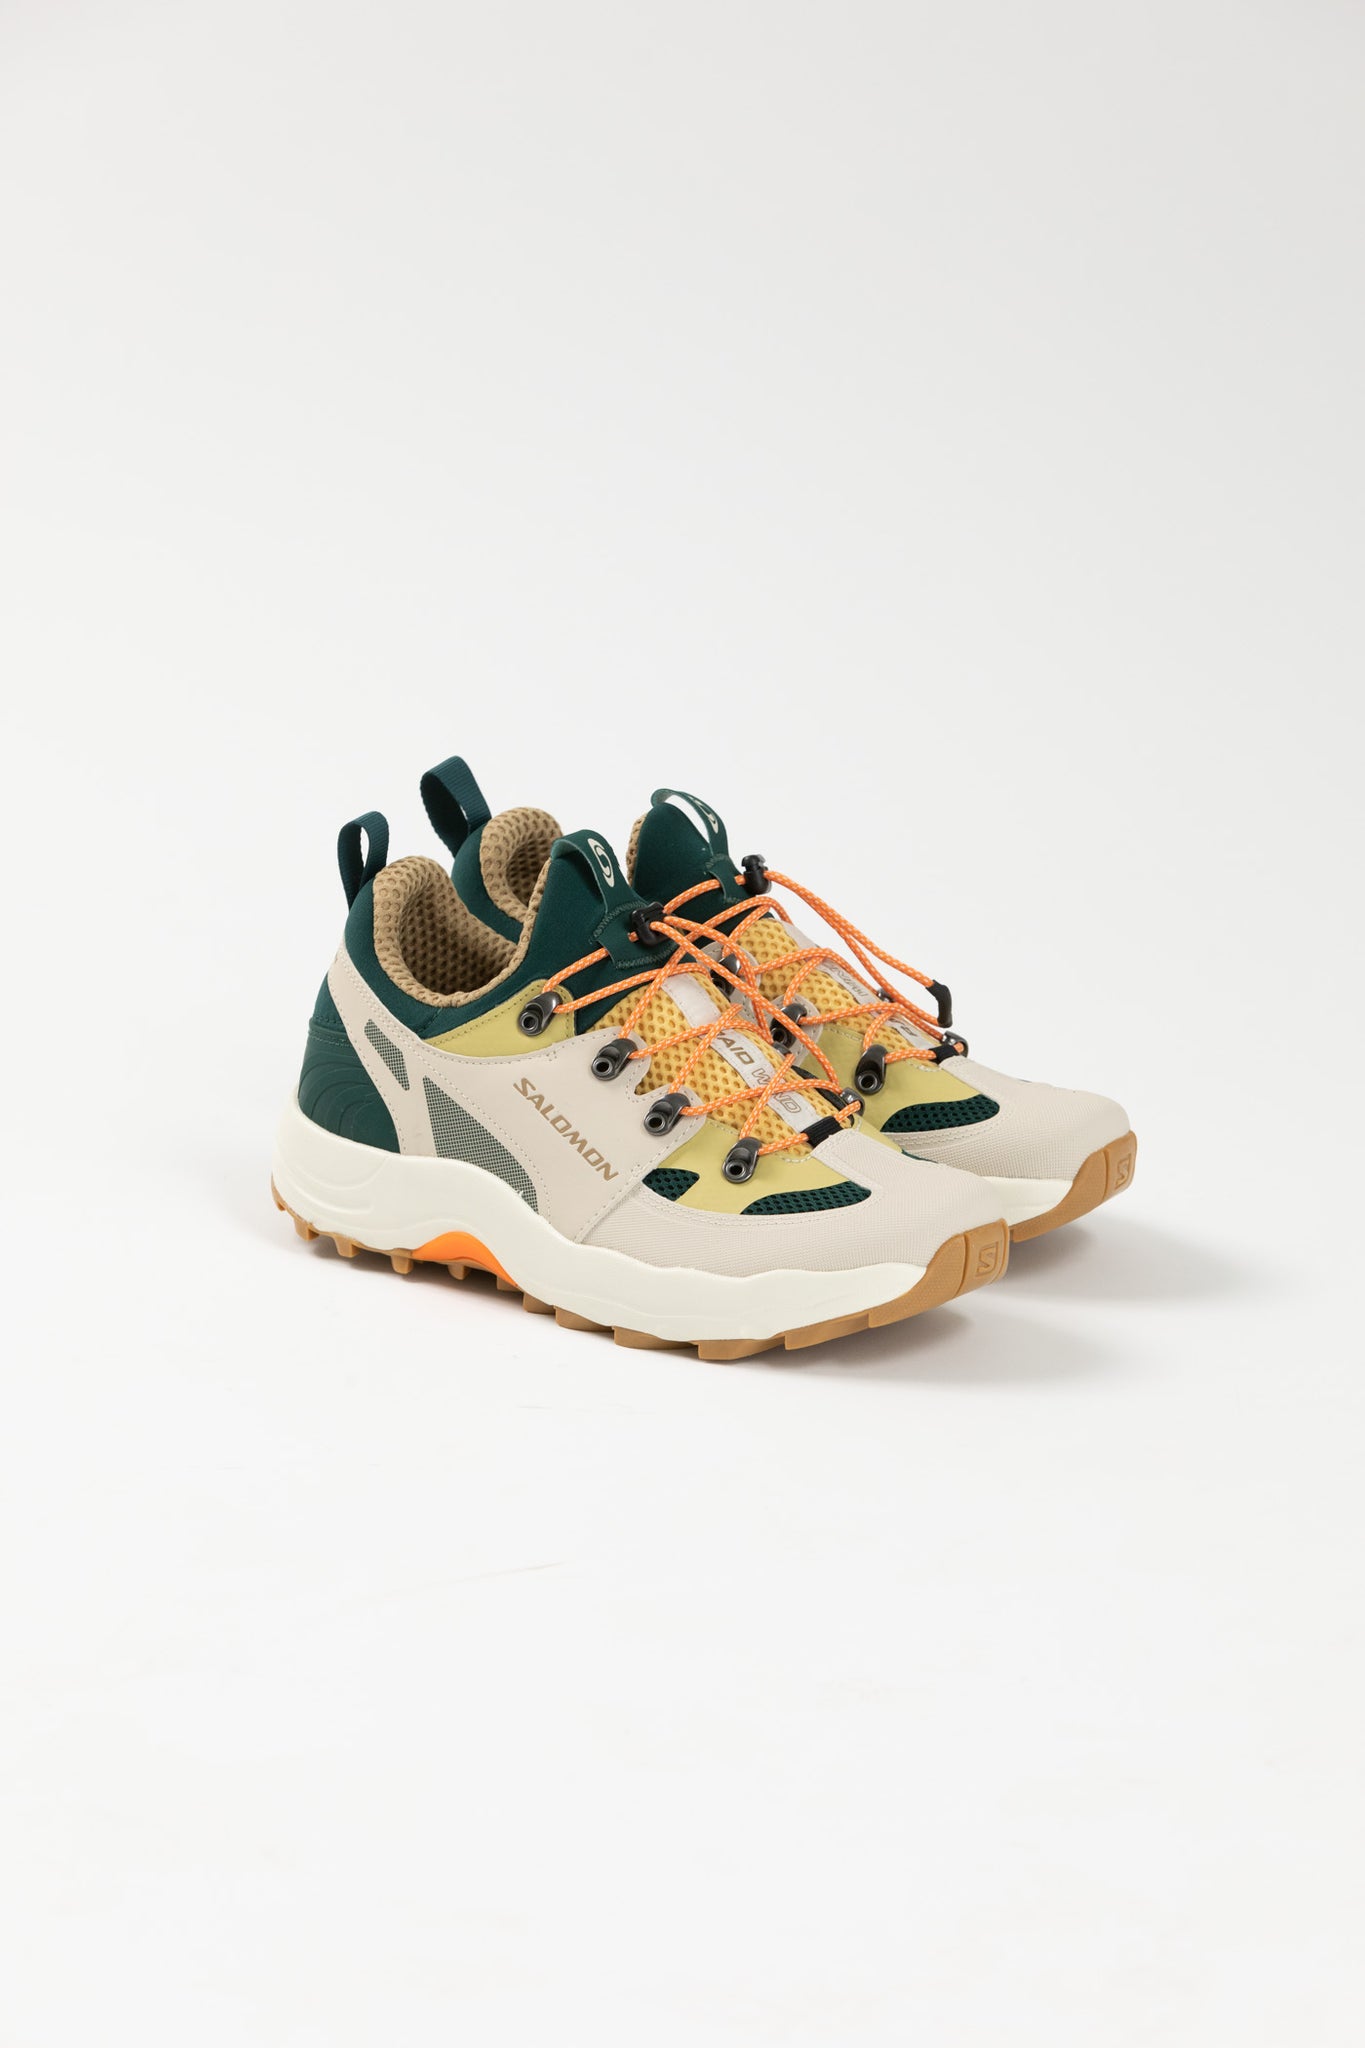 Off-White and Green Raid Wind Sneakers